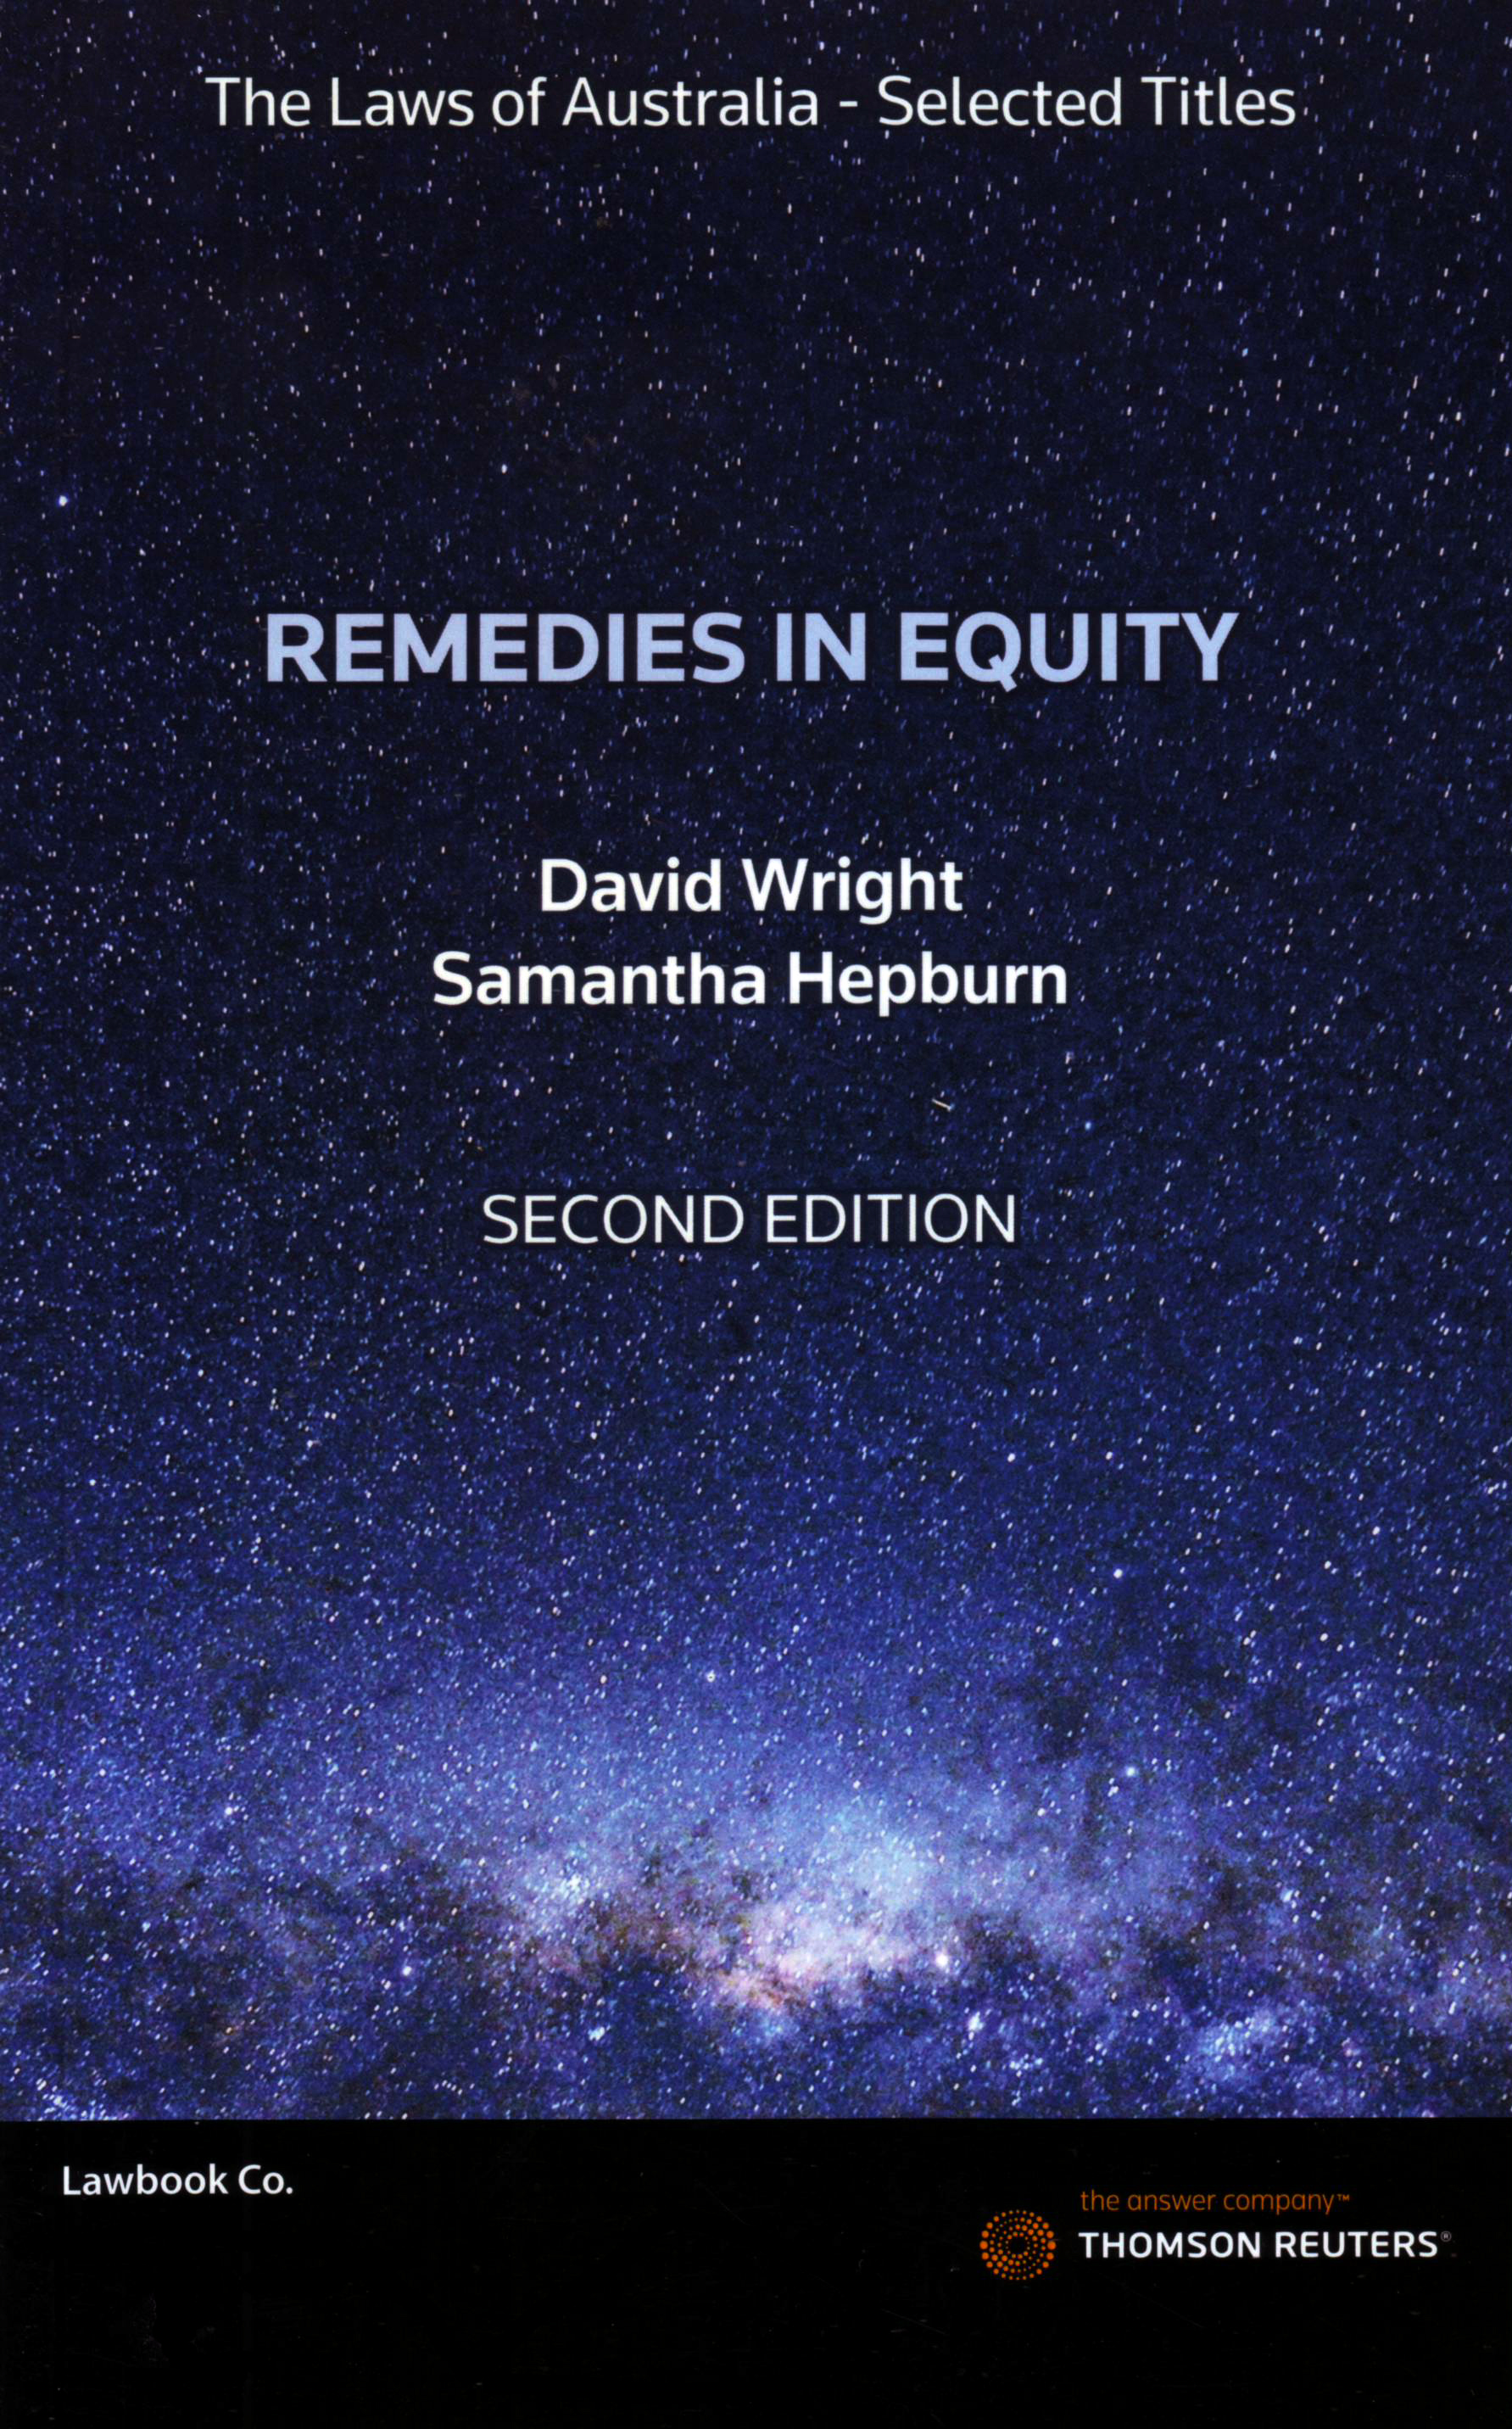 Remedies in Equity e2